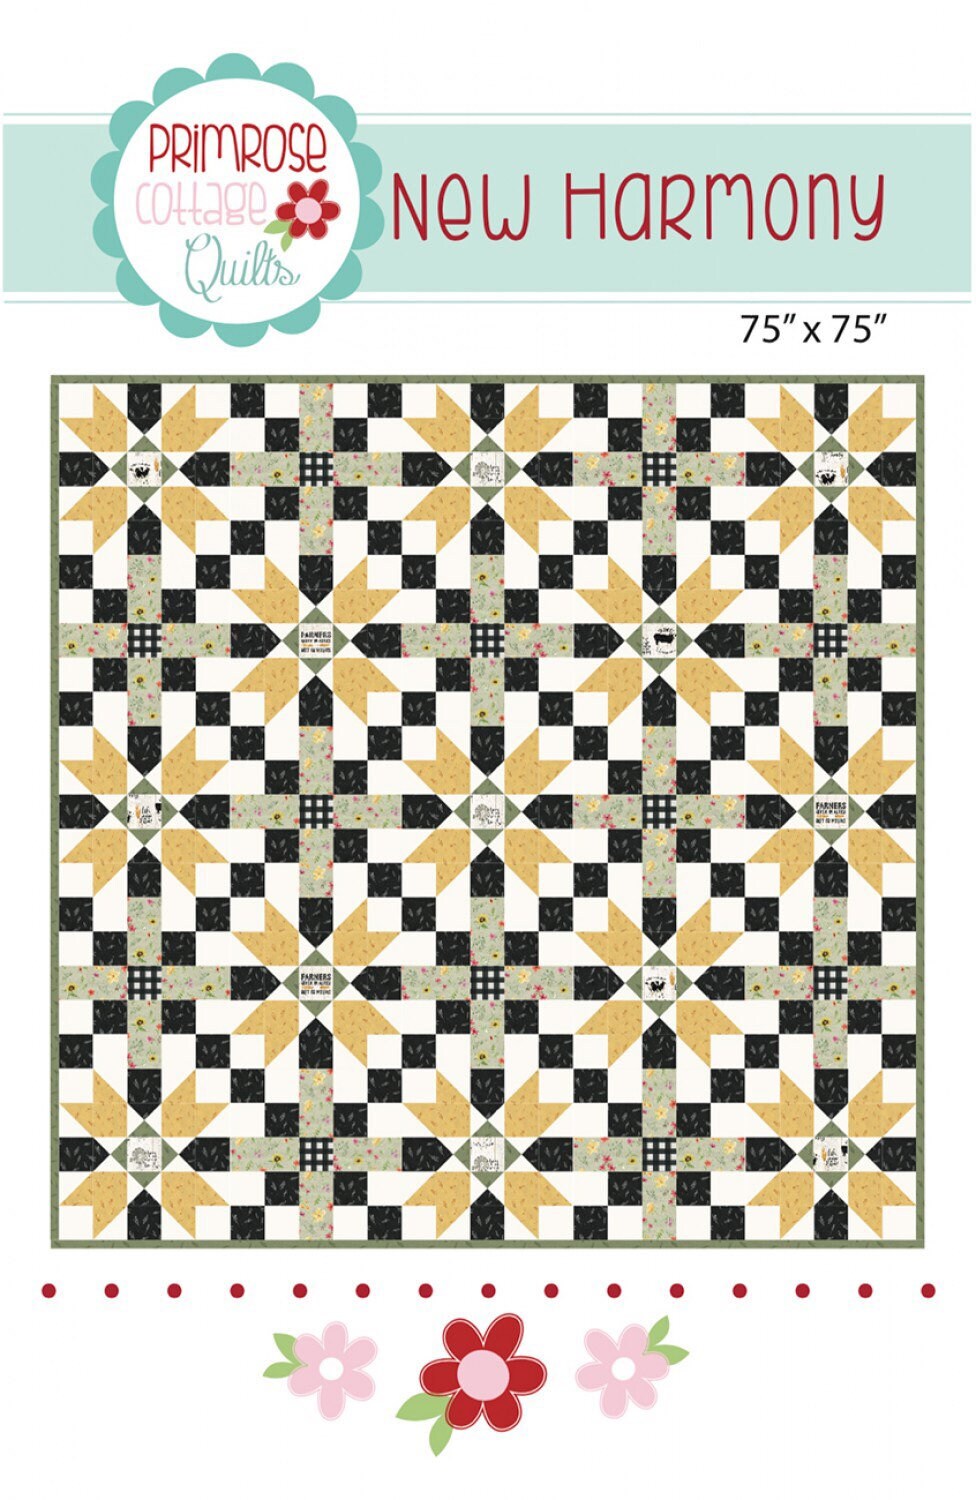 New Harmony Quilt Pattern - Primrose Cottage Quilts - 75” x 75”